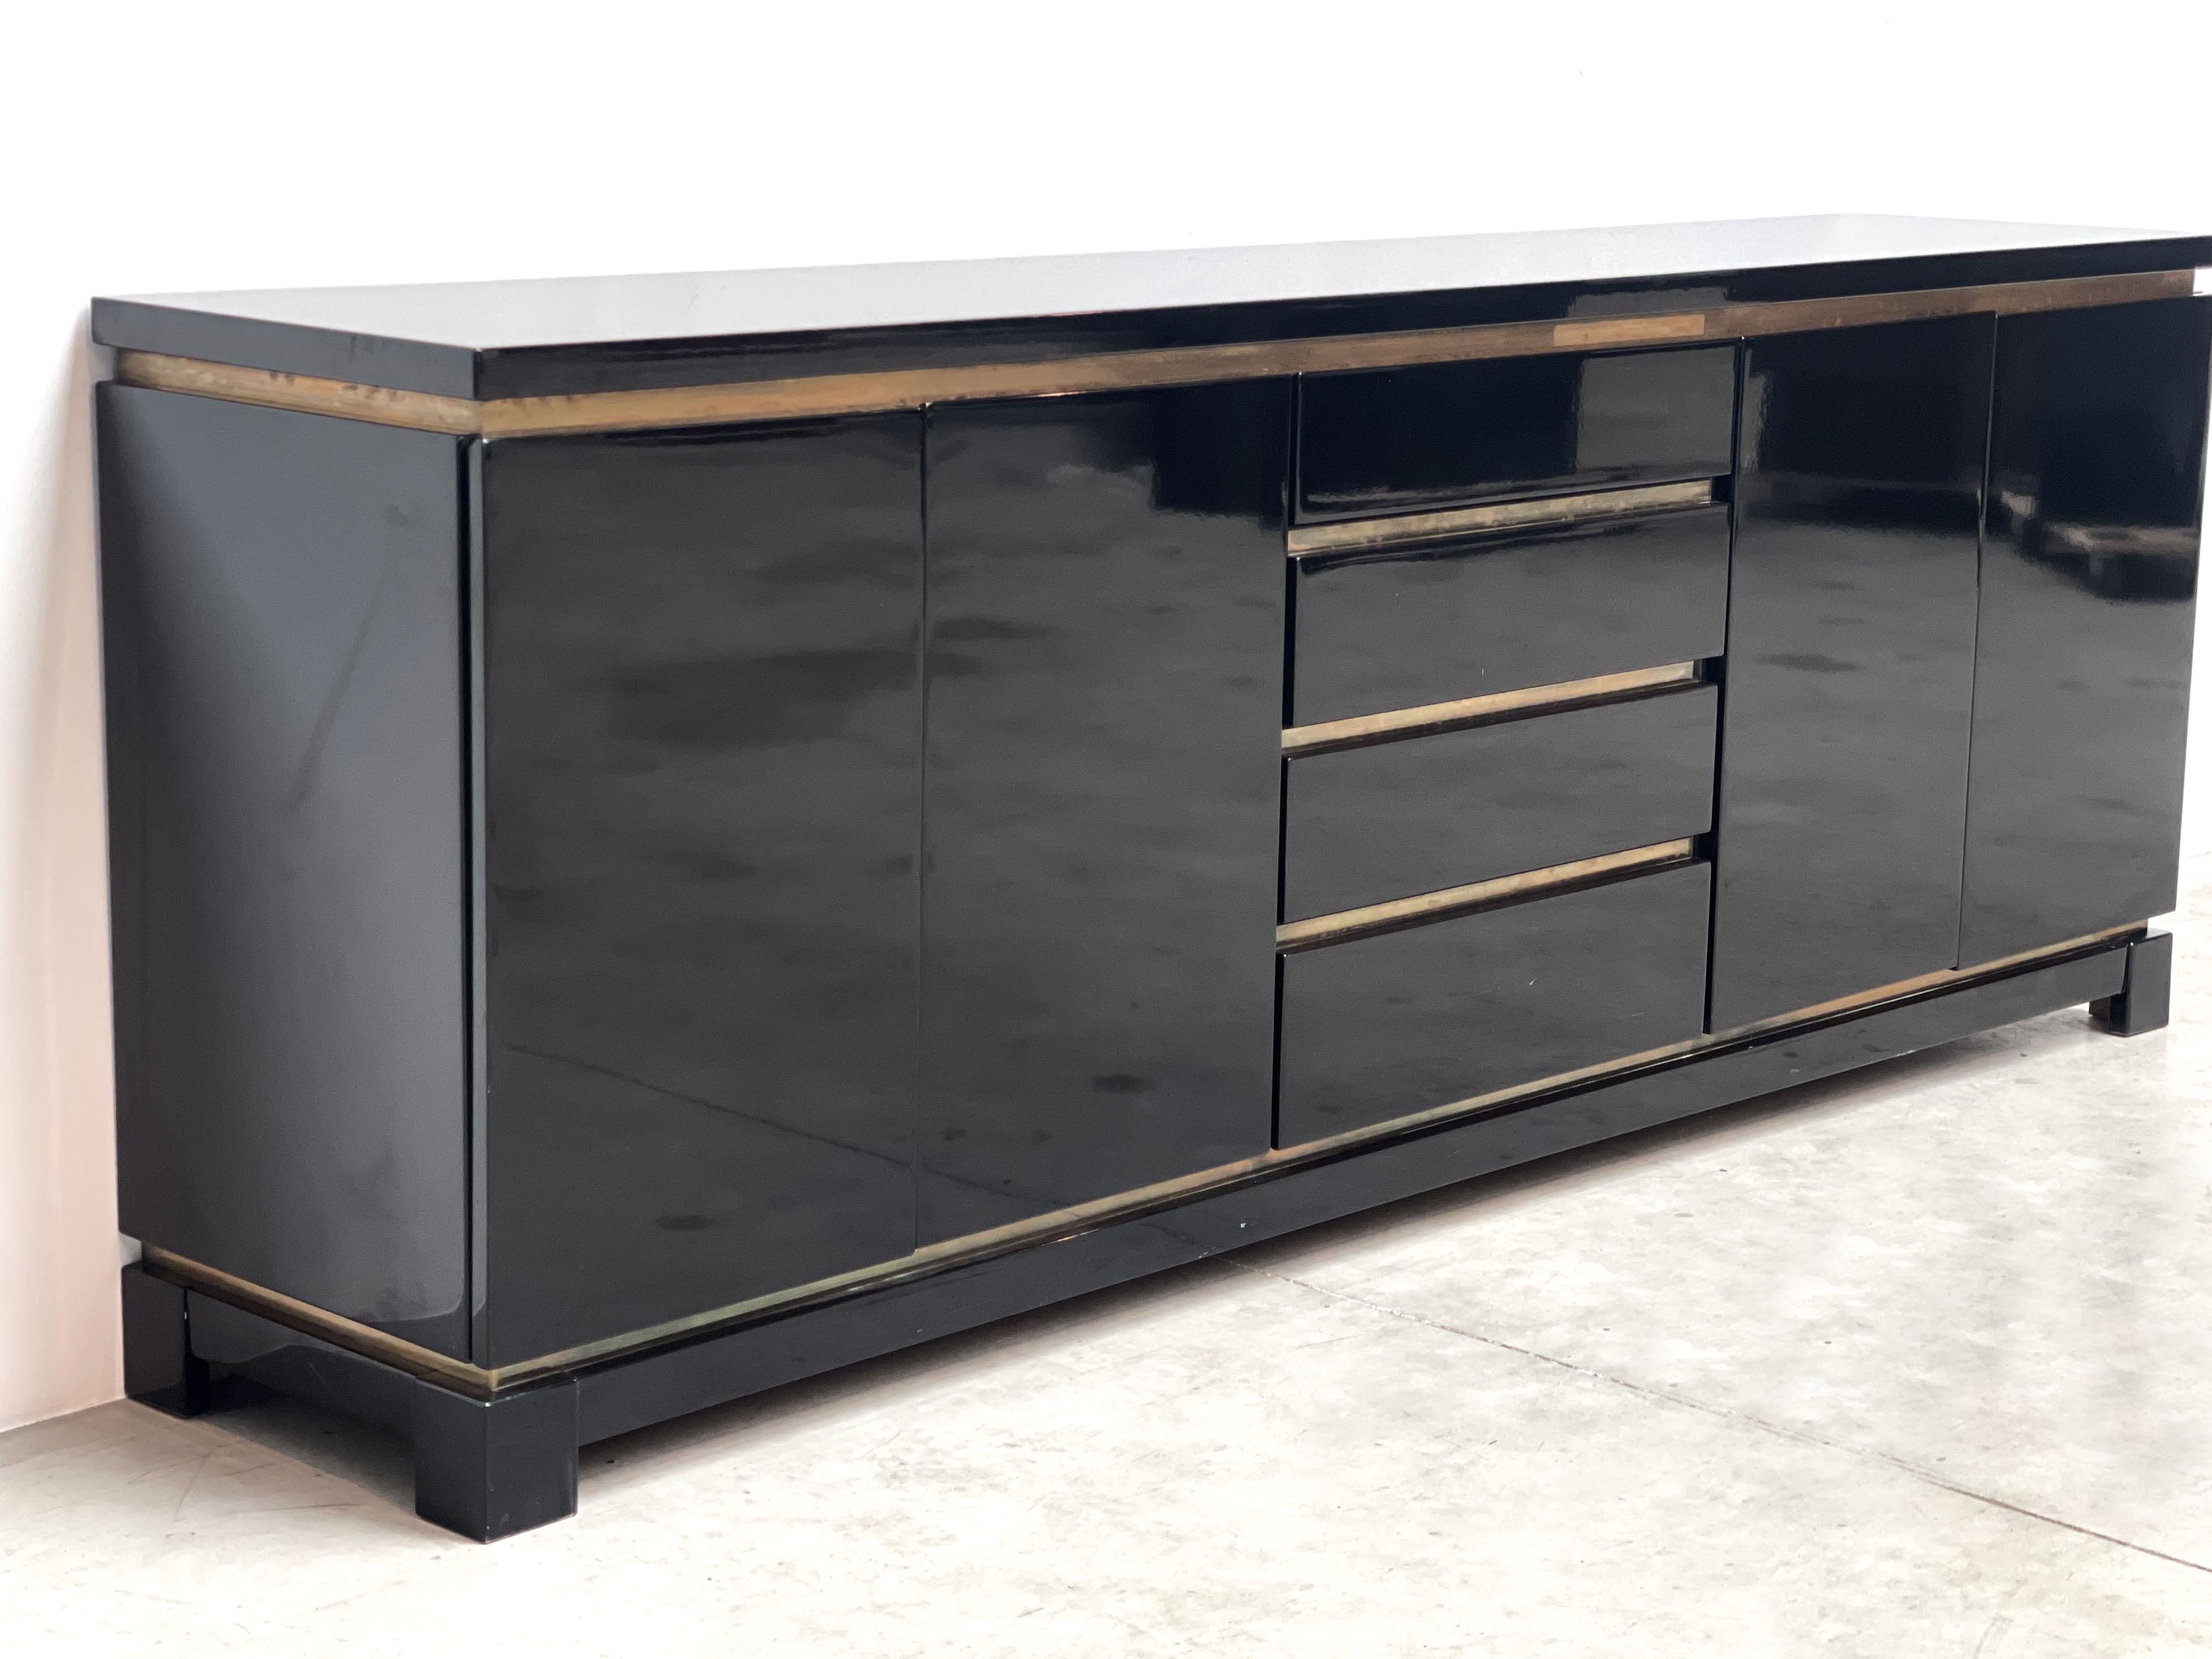 Luxurious seventies glamour sideboard by Jean claude Mahey consitsing of black lacquer panels and brass.

The use of different high quality materials makes this piece very attractive.

The sideboard offers plenty of storage space

Good condition